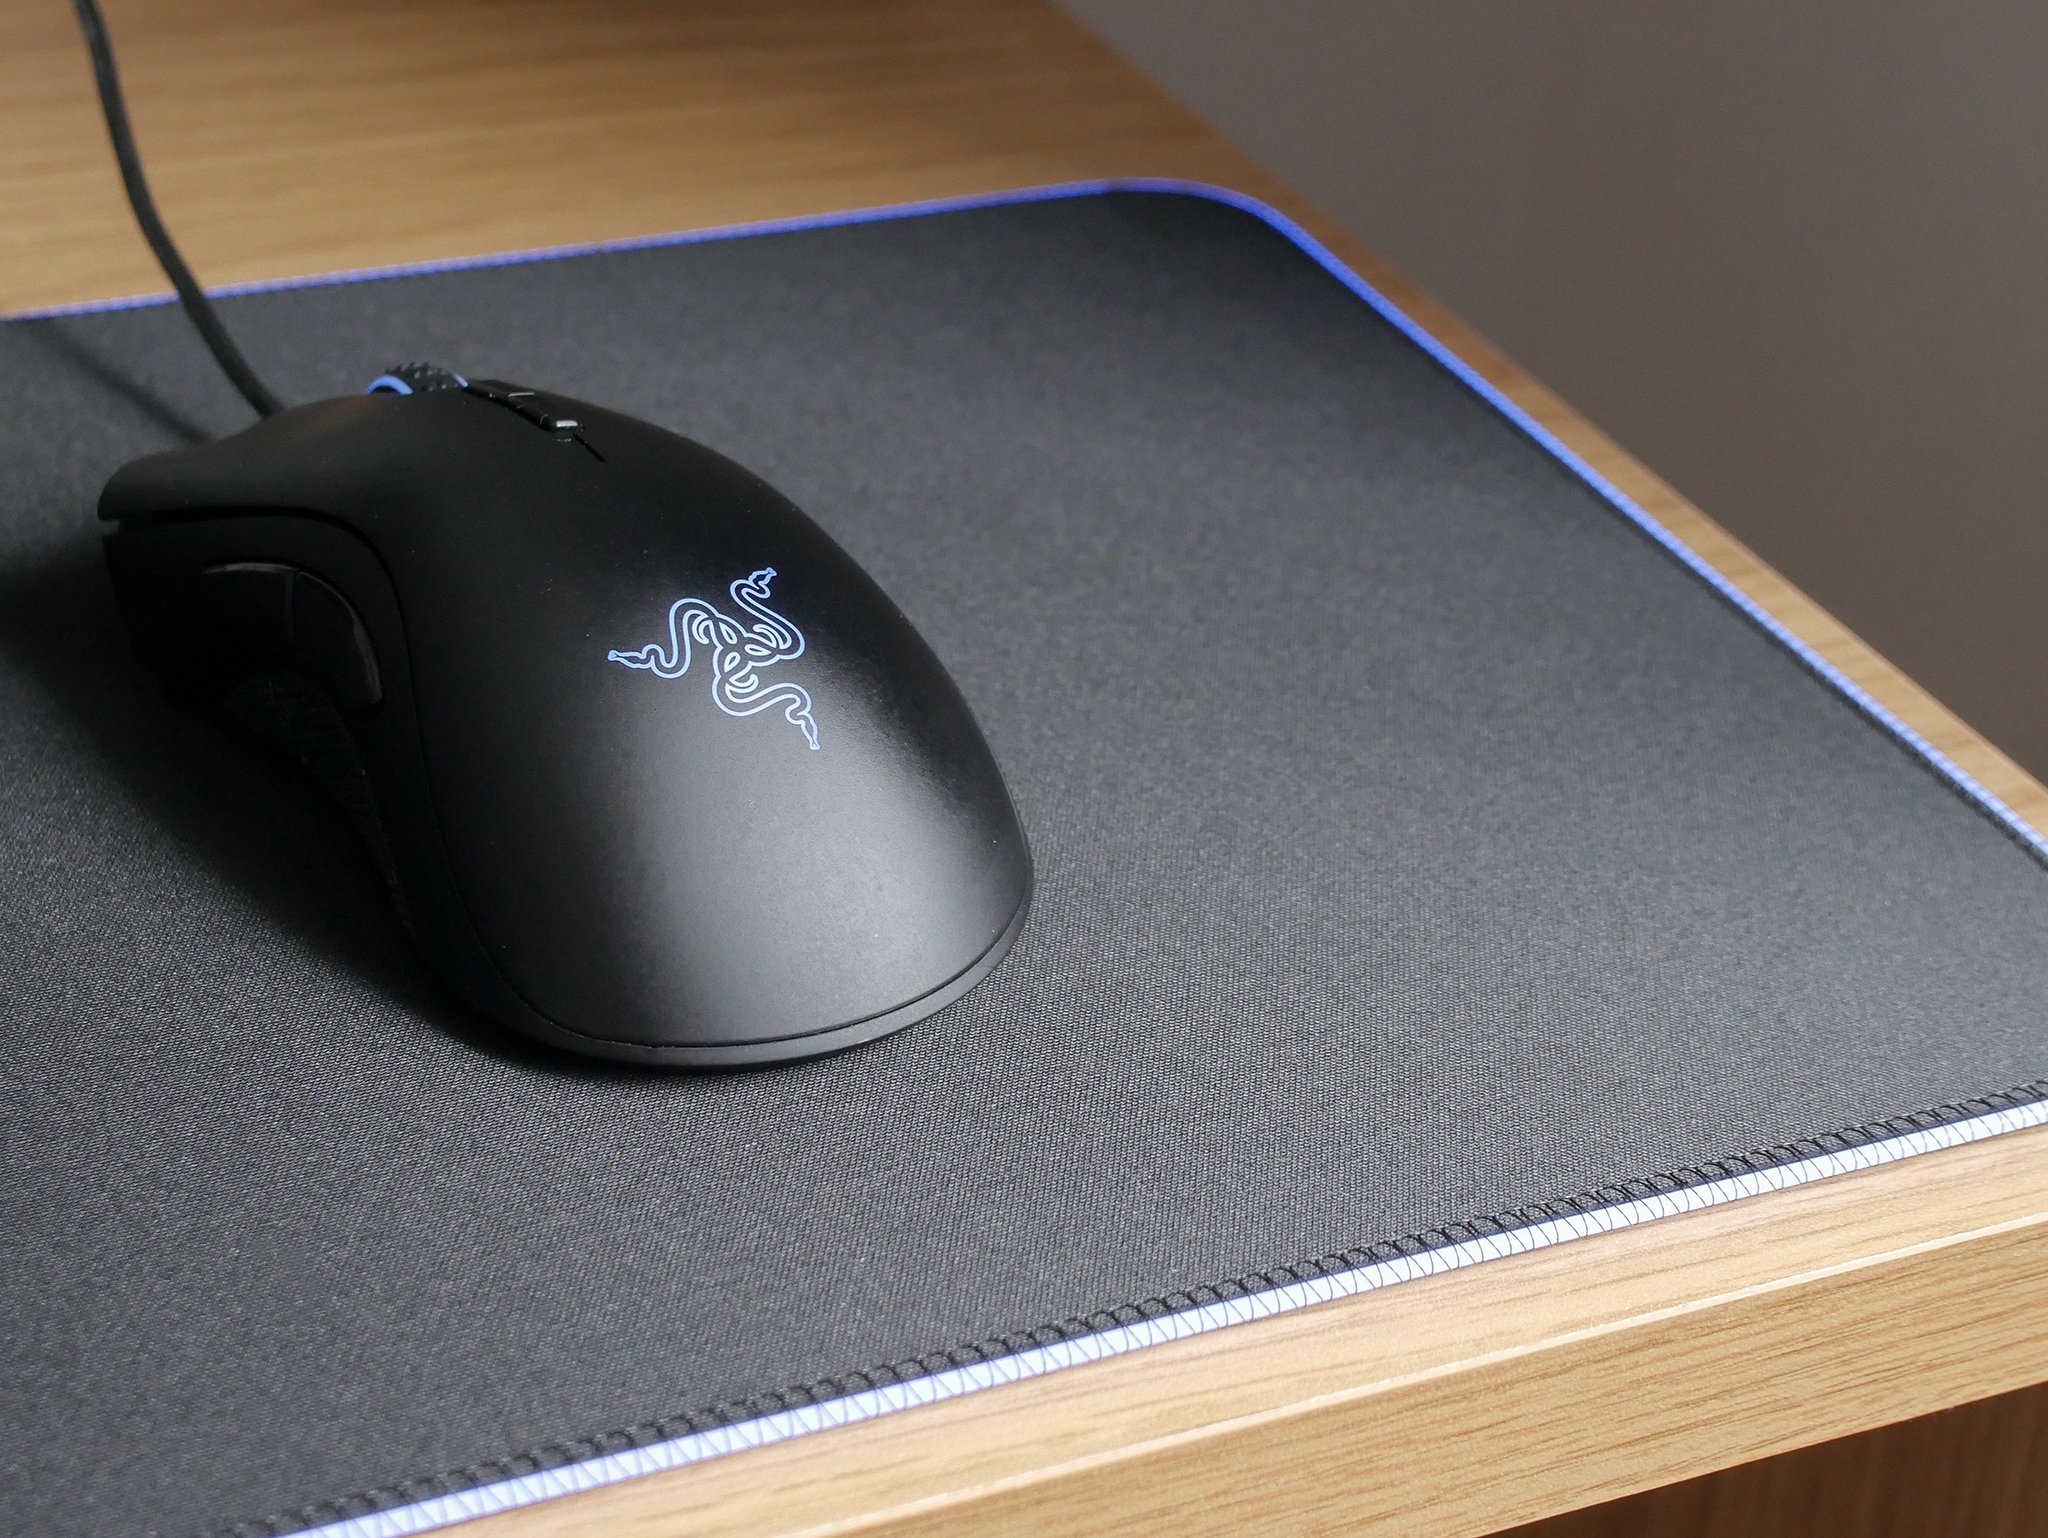 Razer Goliathus Chroma [Review]: Lights up an exceptional mousepad